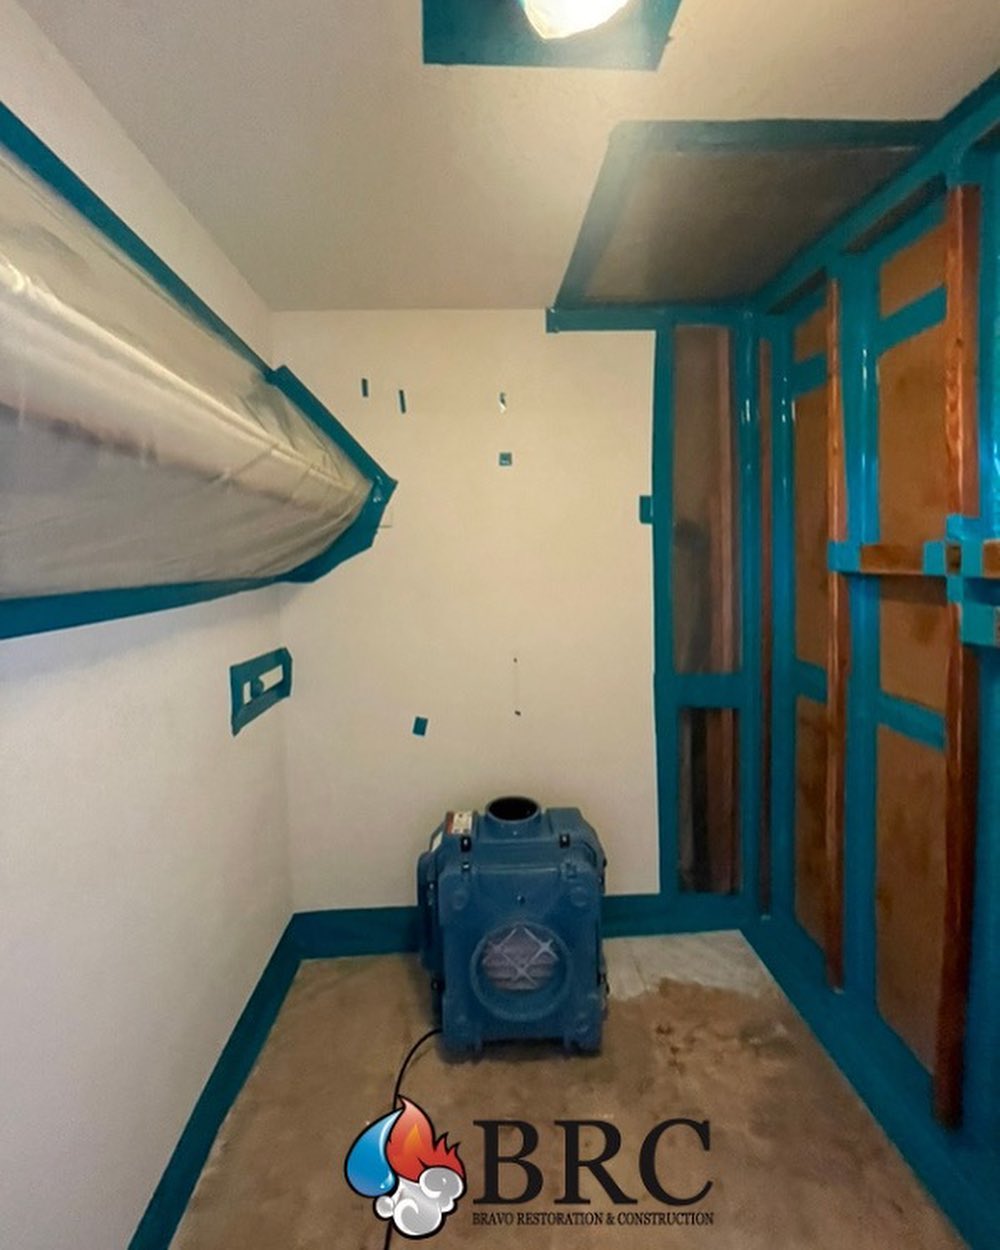 A room with blue paint and a blue fan, in need of water damage remediation experts.